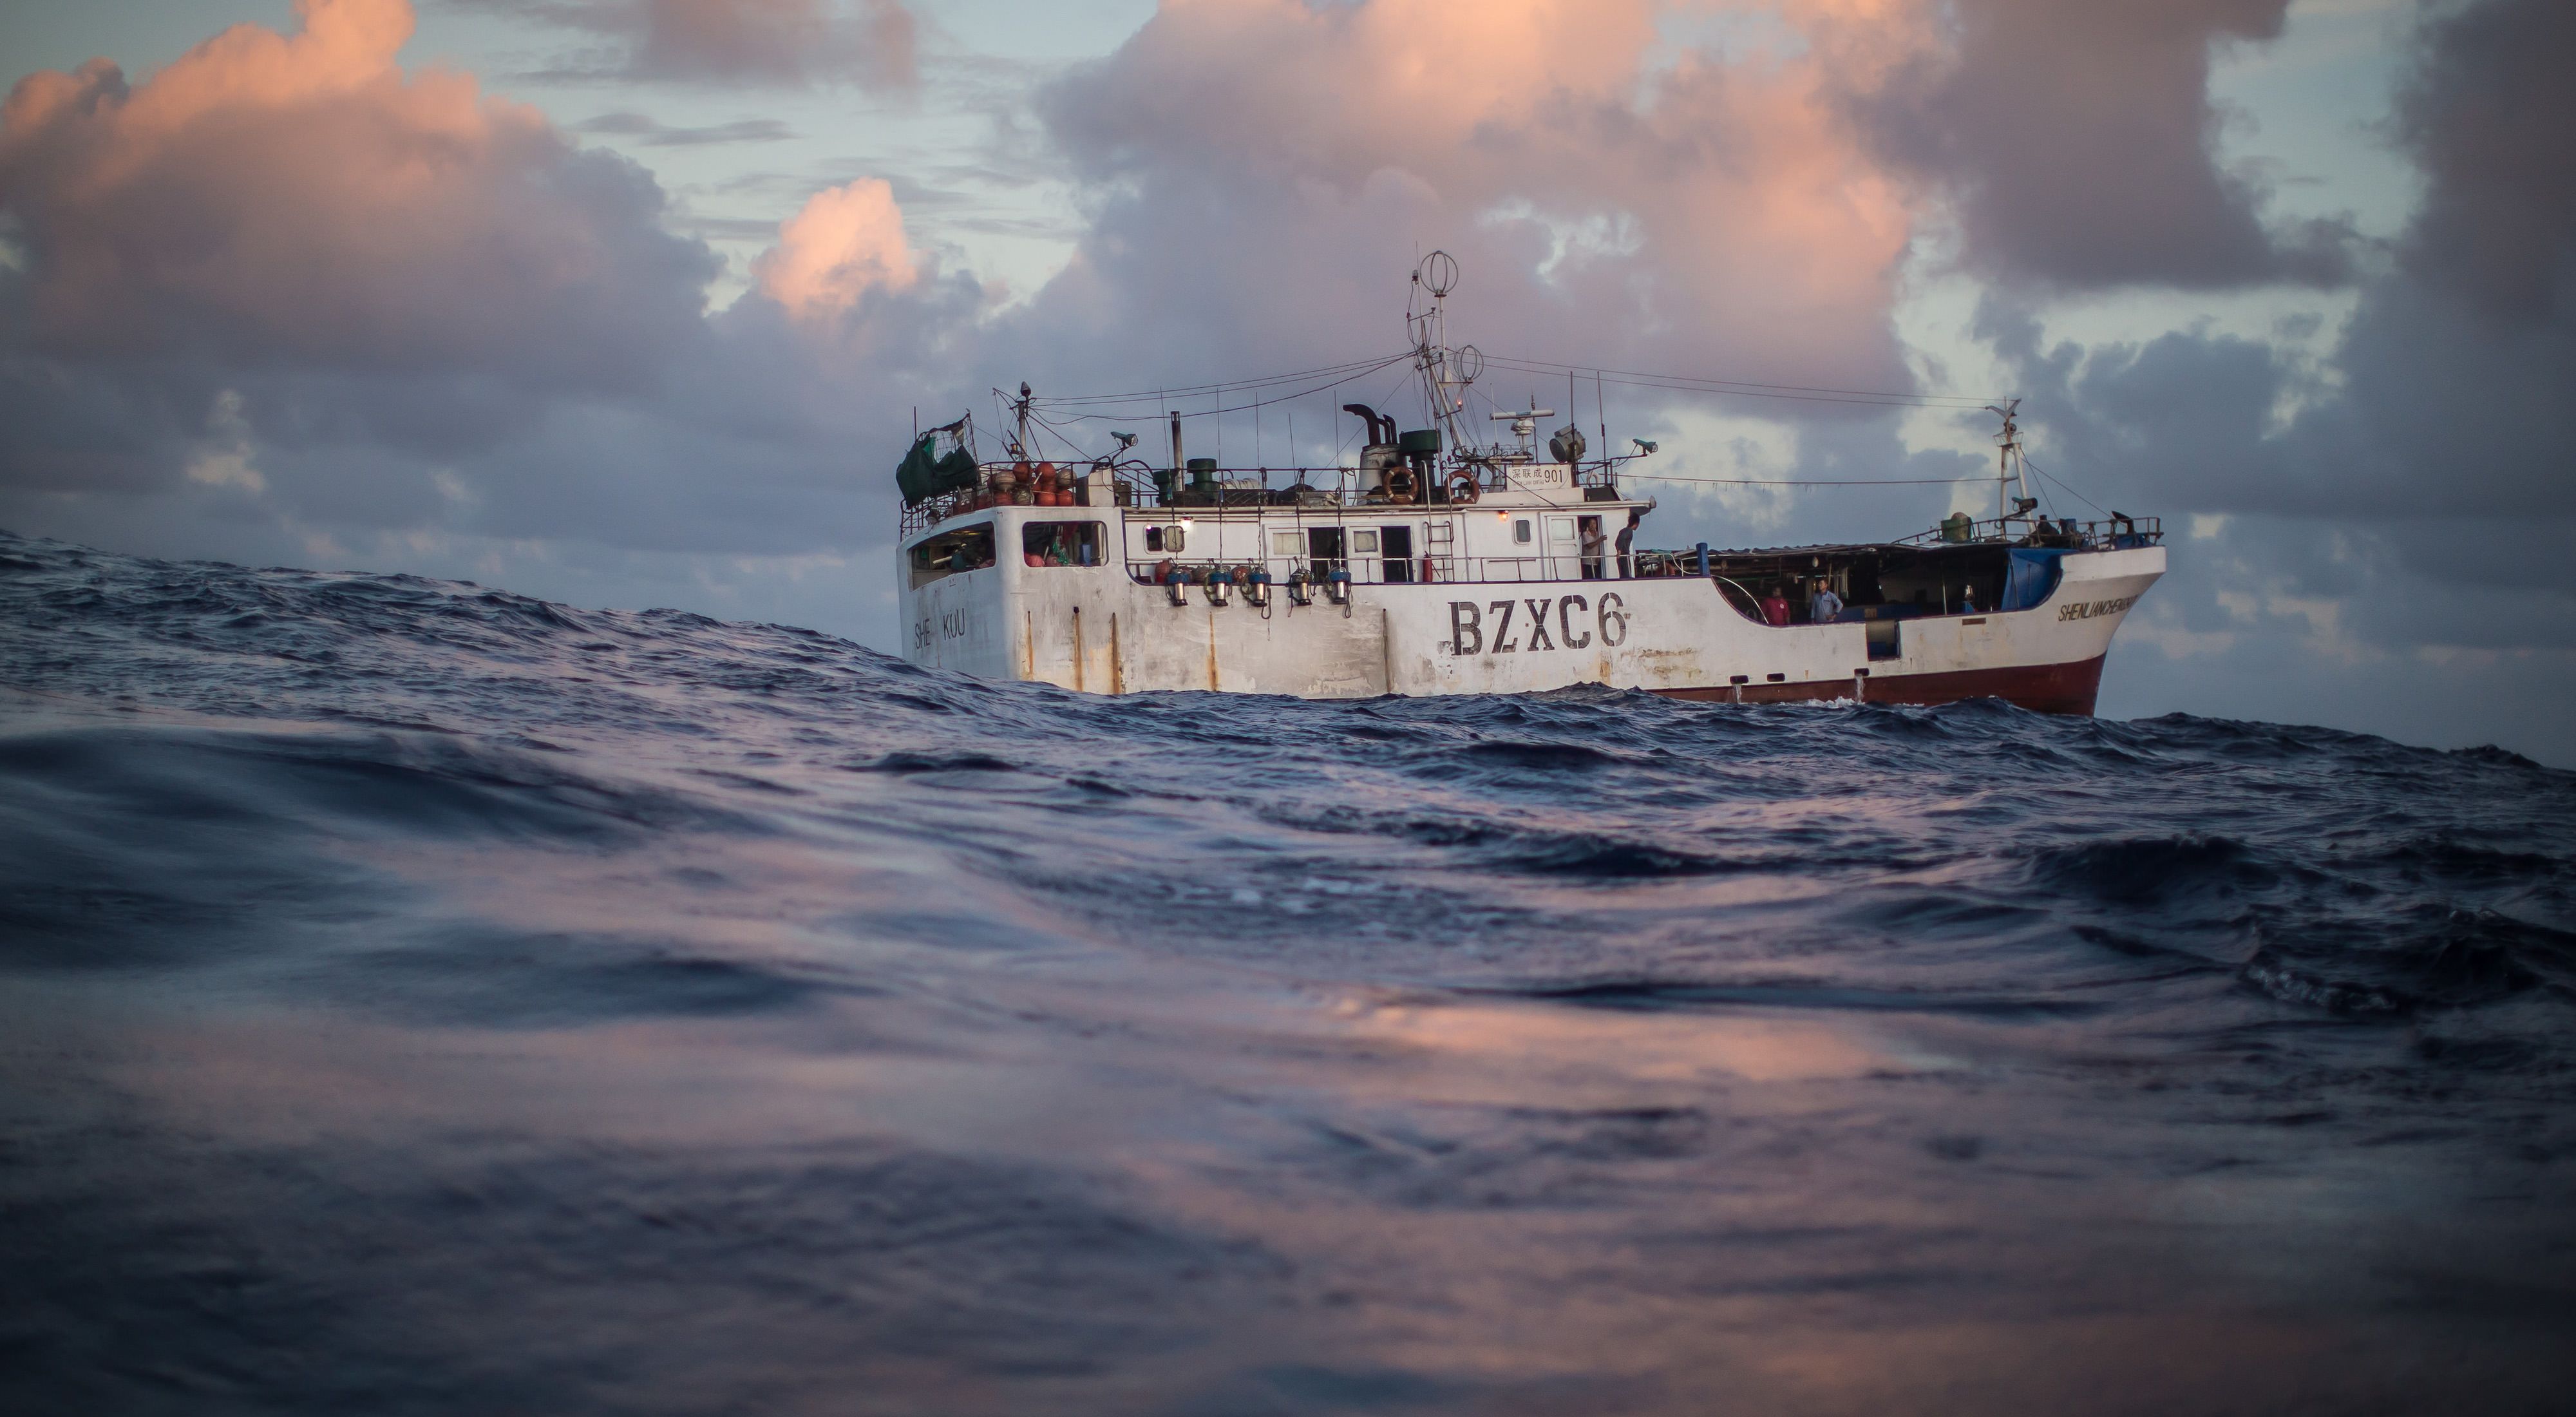 TNC is working with fishermen in Palau to test new fishing practices and methods to reduce bycatch and to sustainably manage the Pacific tuna fishery. 